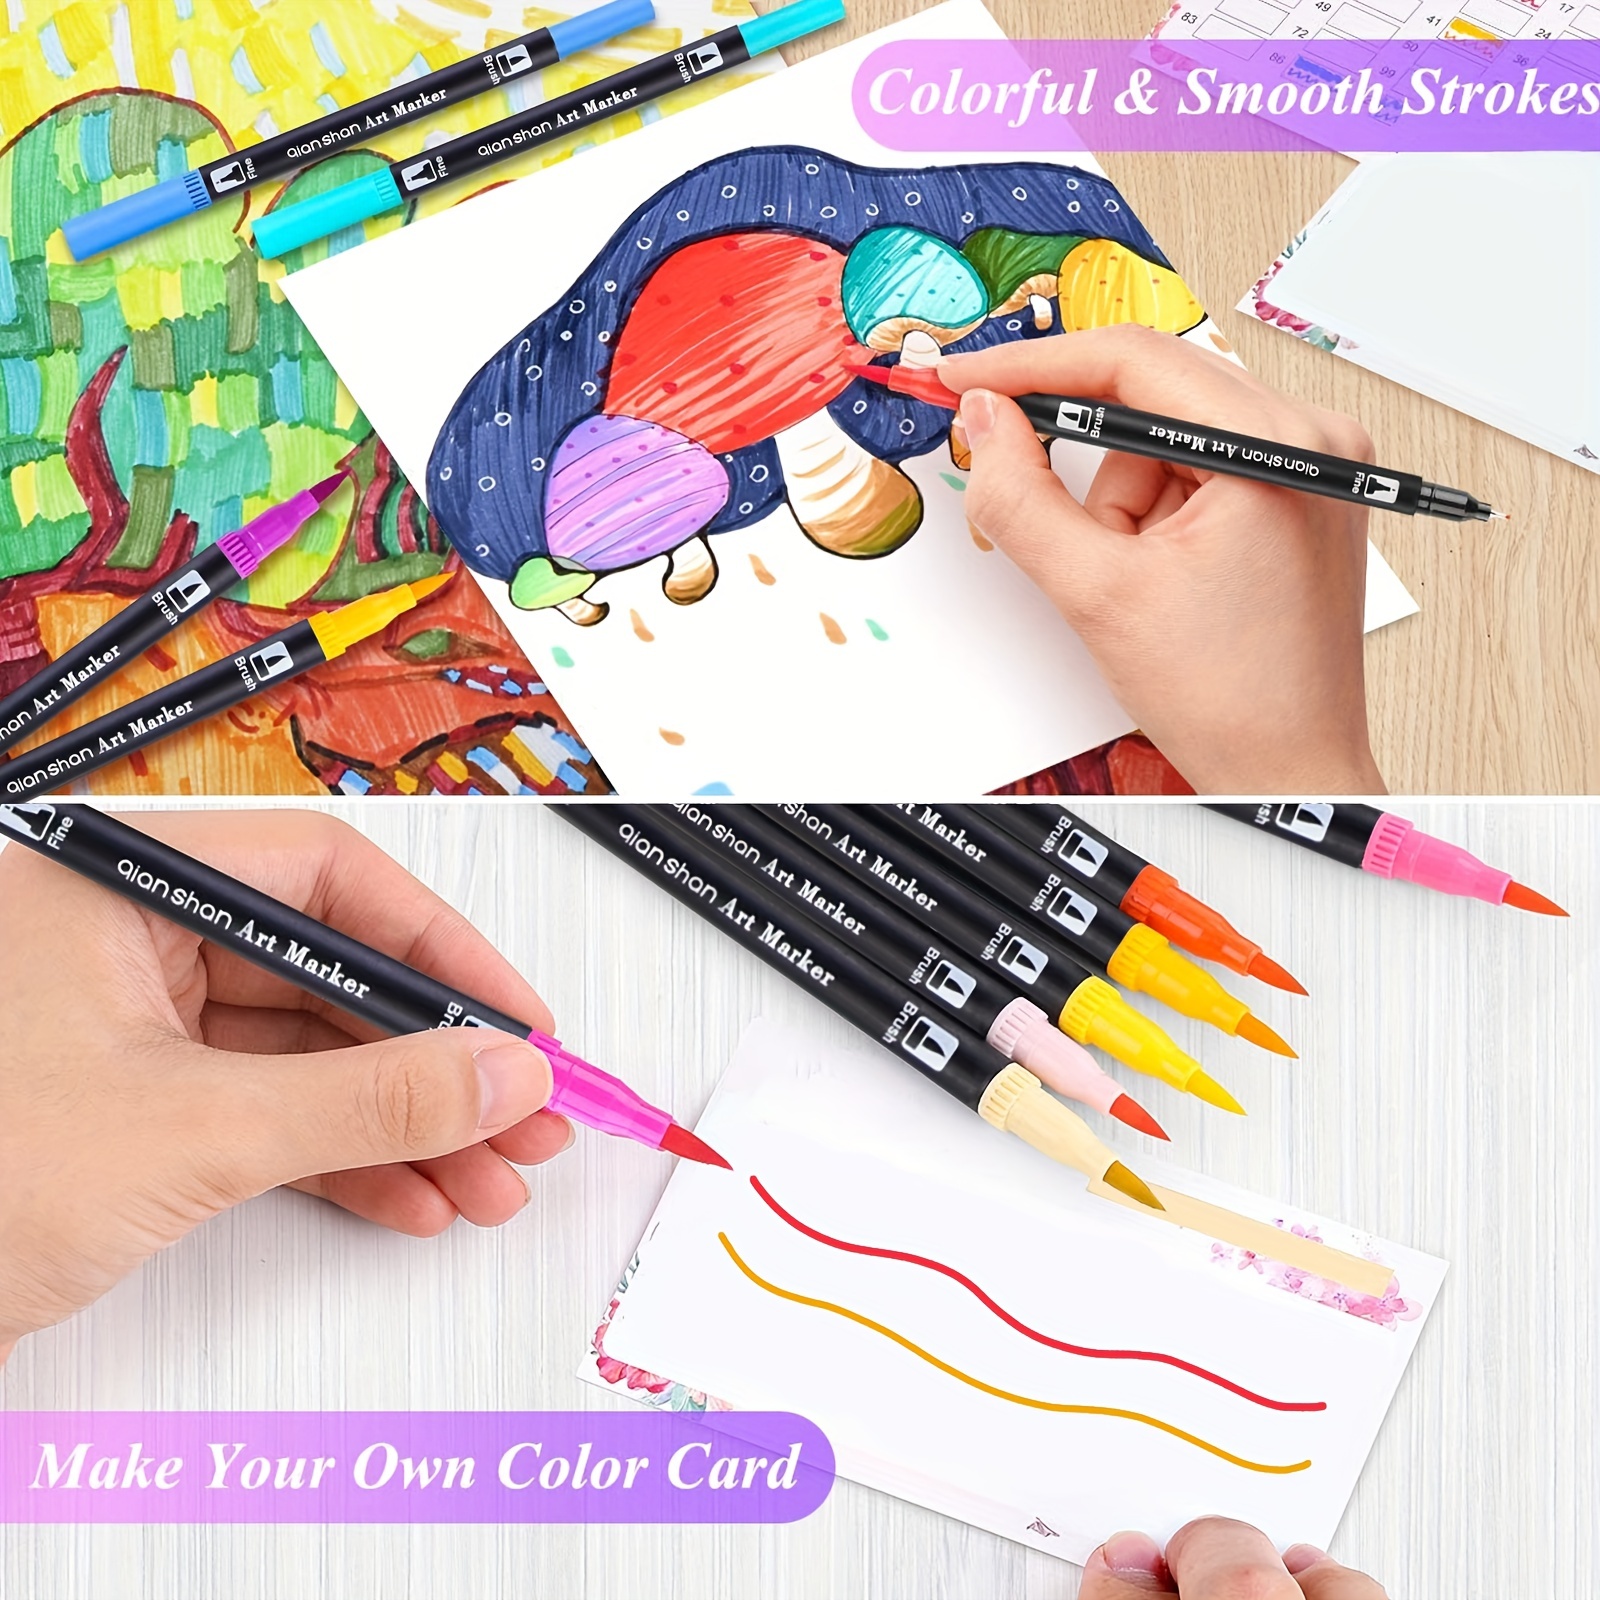 Japan Tombow ABT Soft Brush Pen Art Markers Set Professional Watercolor  Drawing Marker Pens Caligraphy Lettering